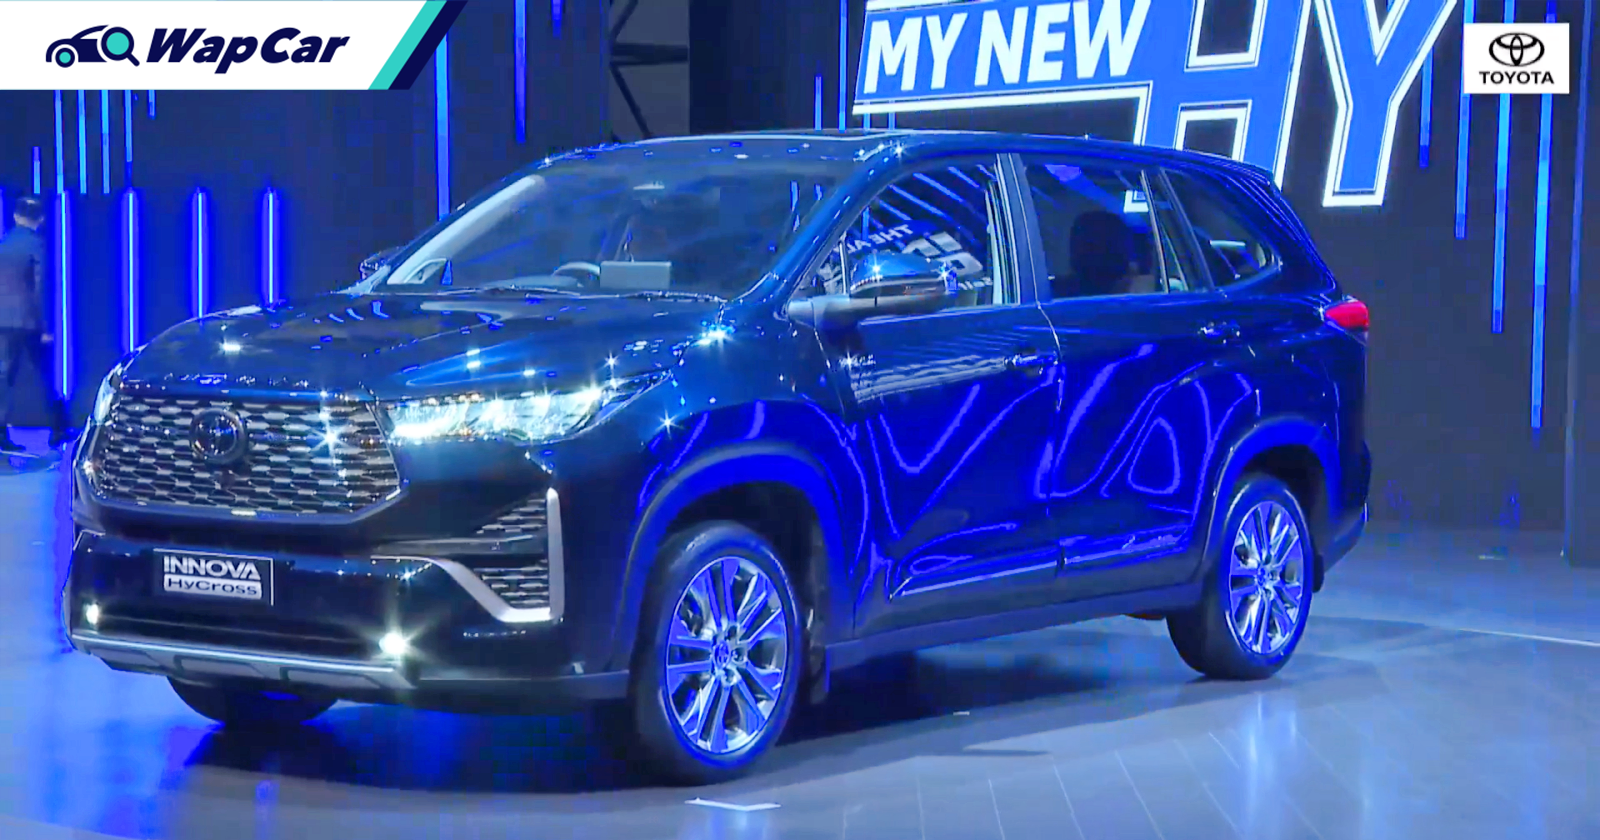 Higher specs than Indonesia, 2023 Toyota Innova launched in India with HyCross name 01